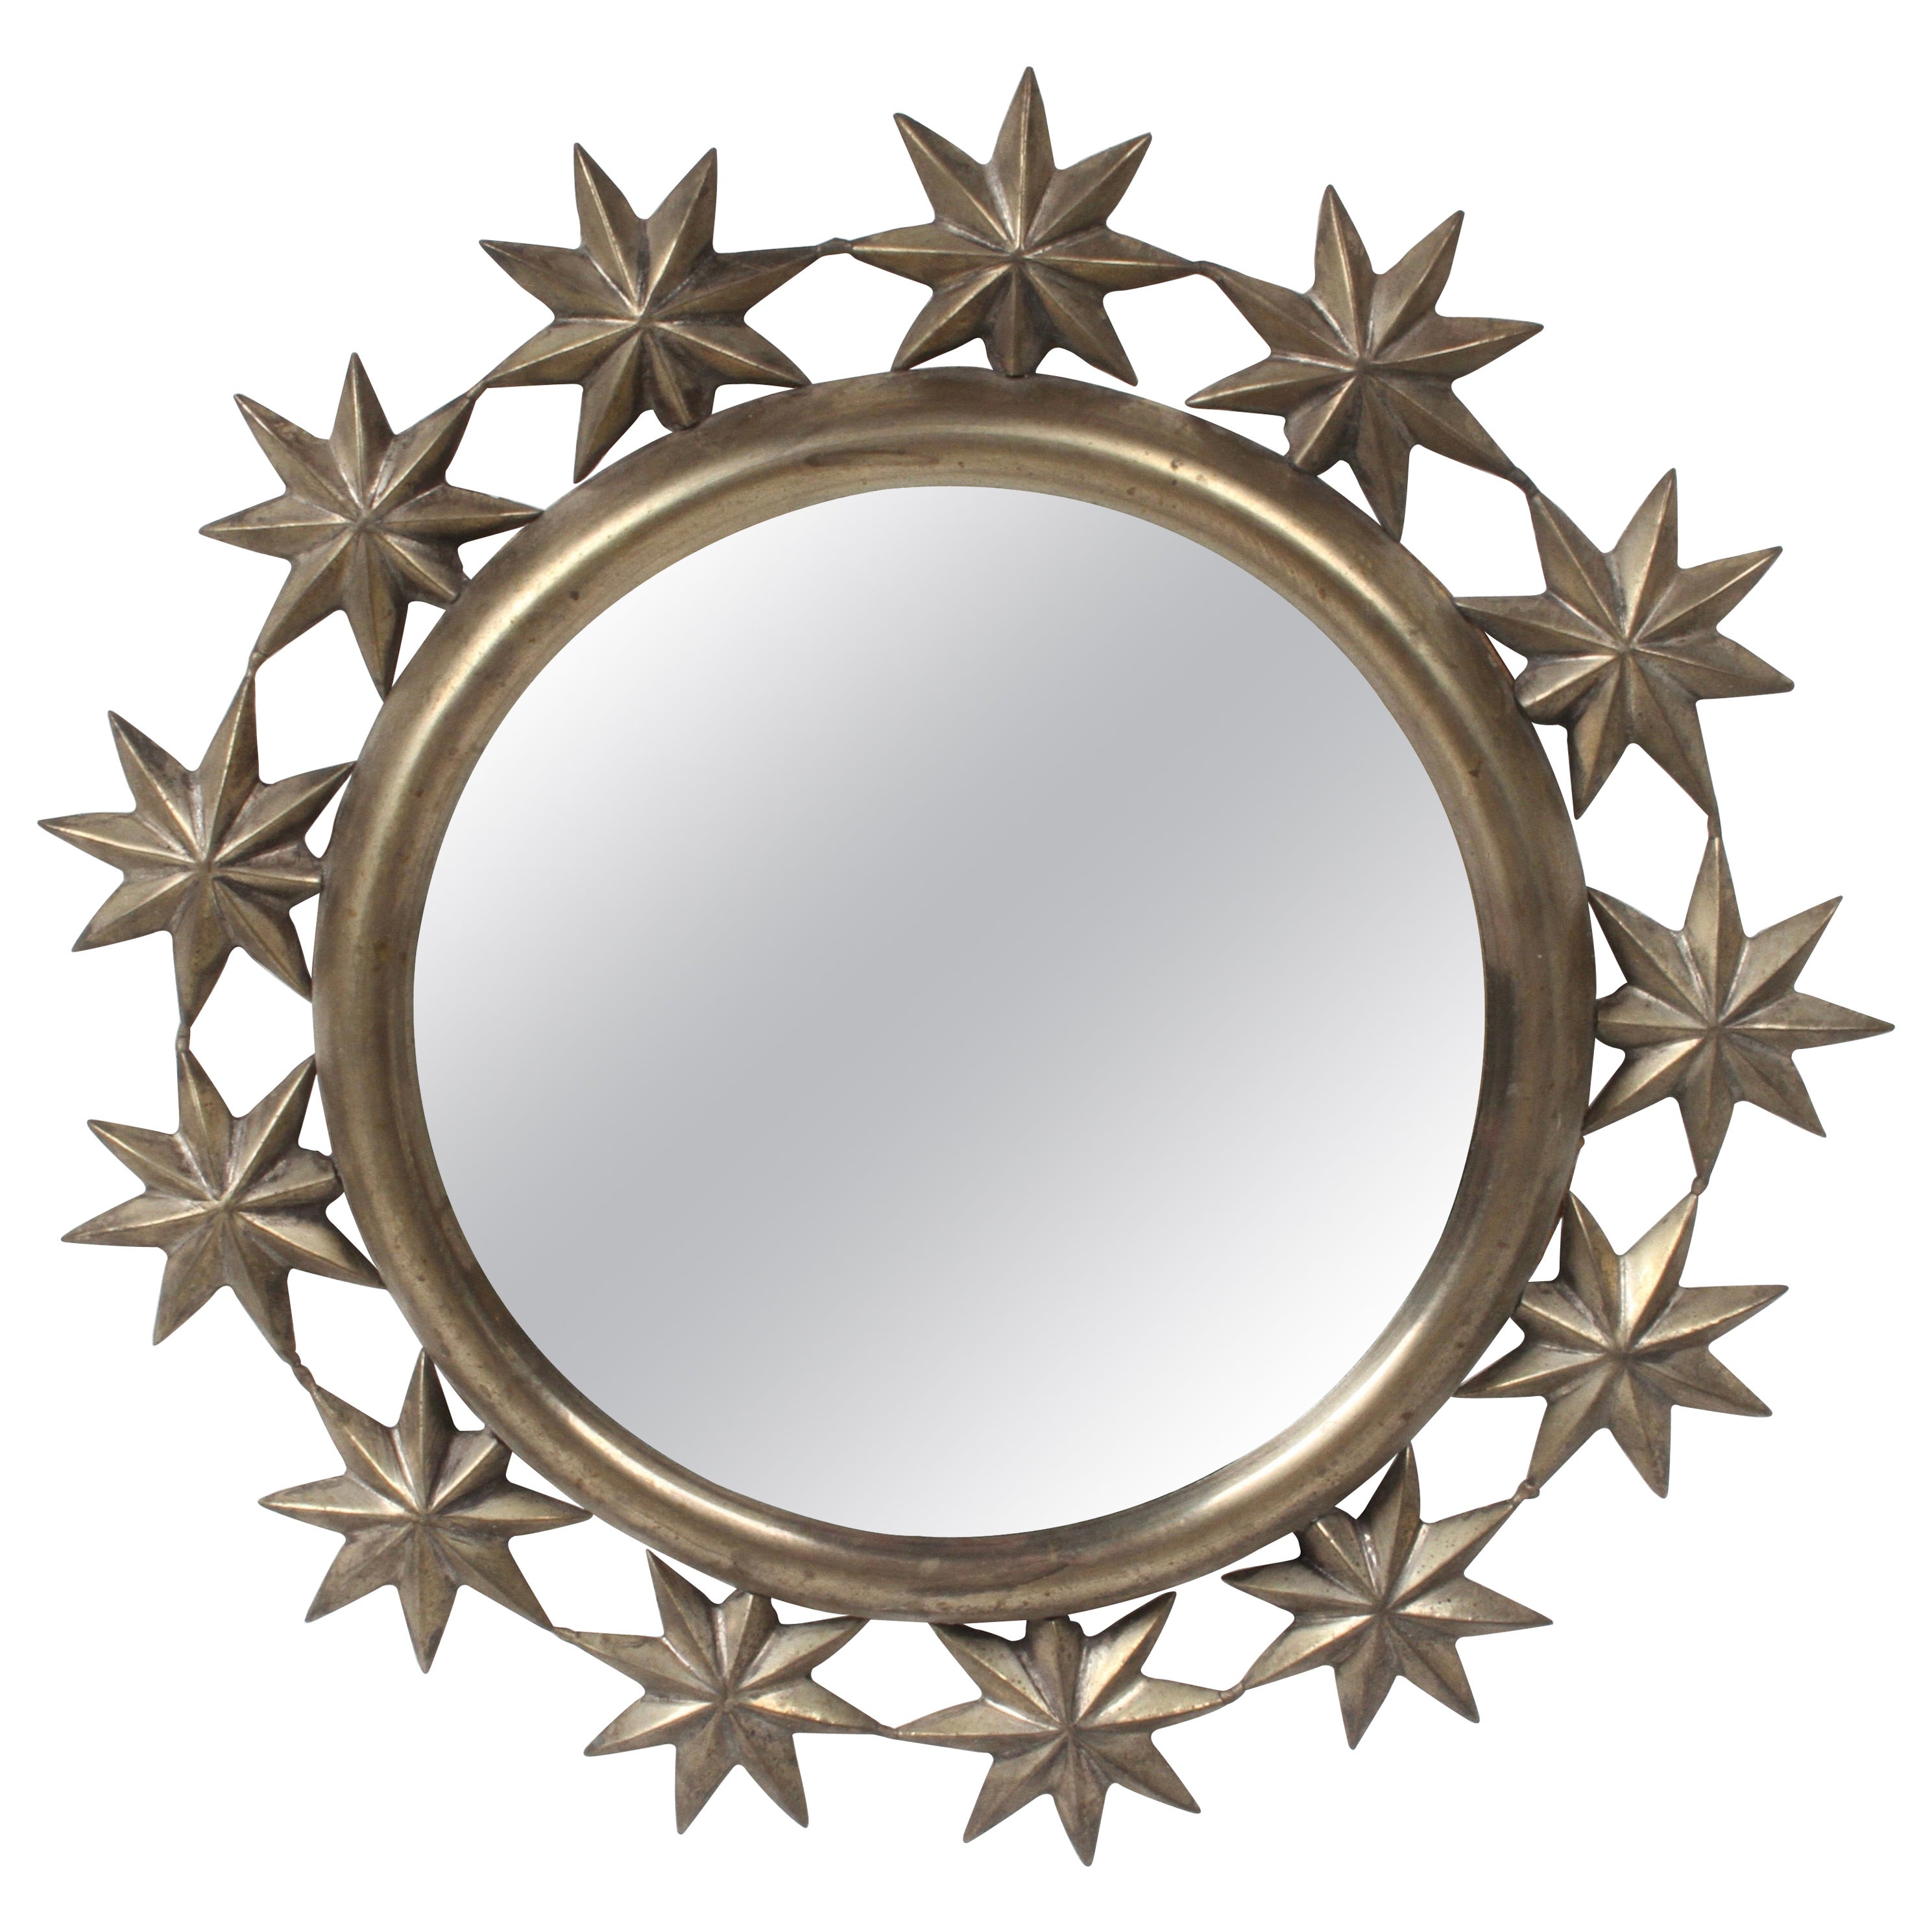 Several Sizes and Coloured Mirrors Available Stars out of Star Shaped Acrylic Mirrors